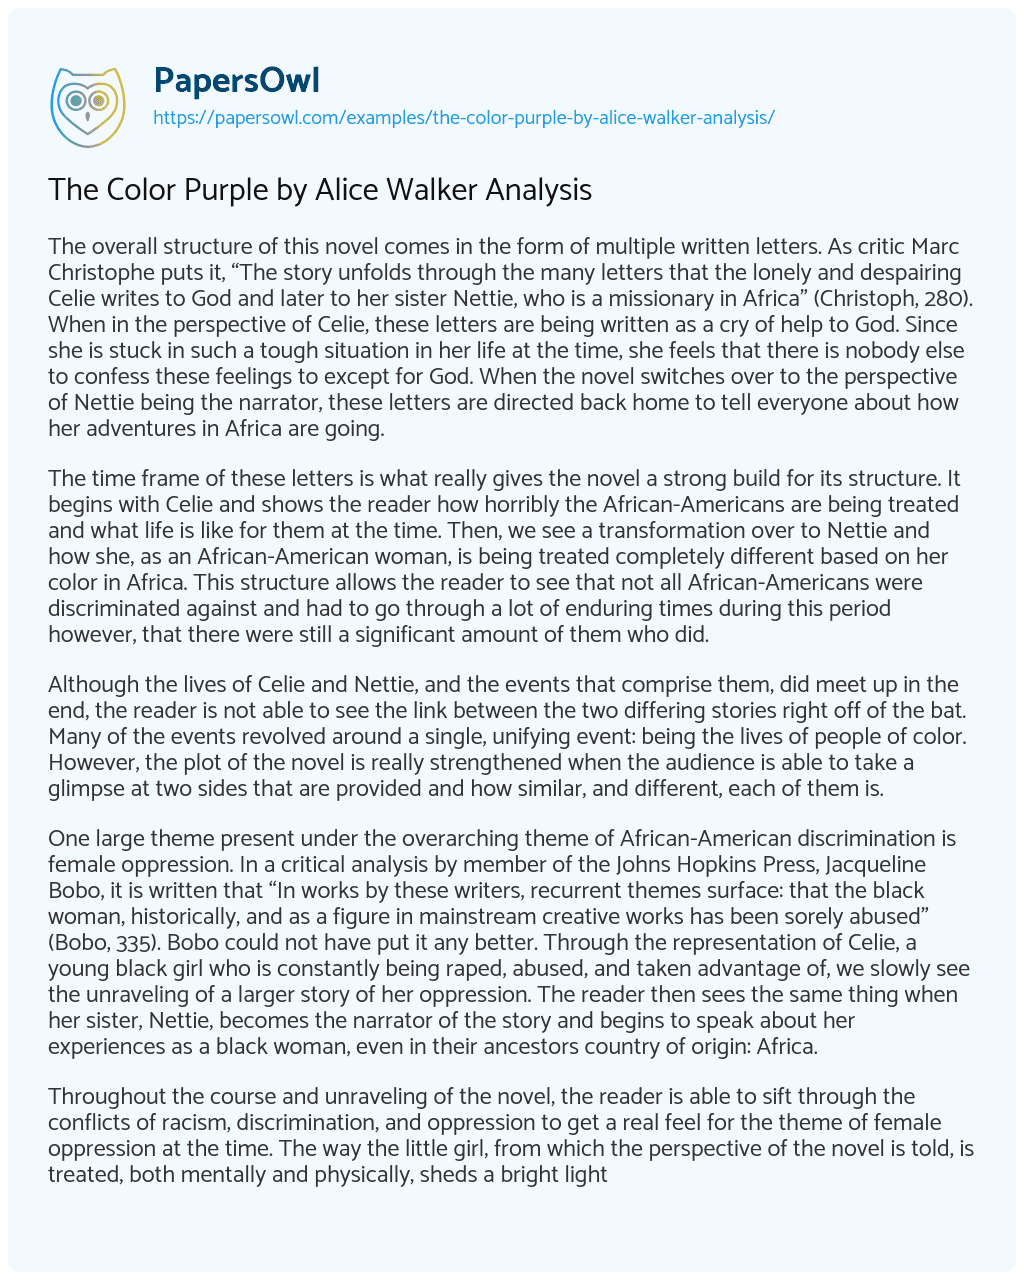 Essay on The Color Purple by Alice Walker Analysis